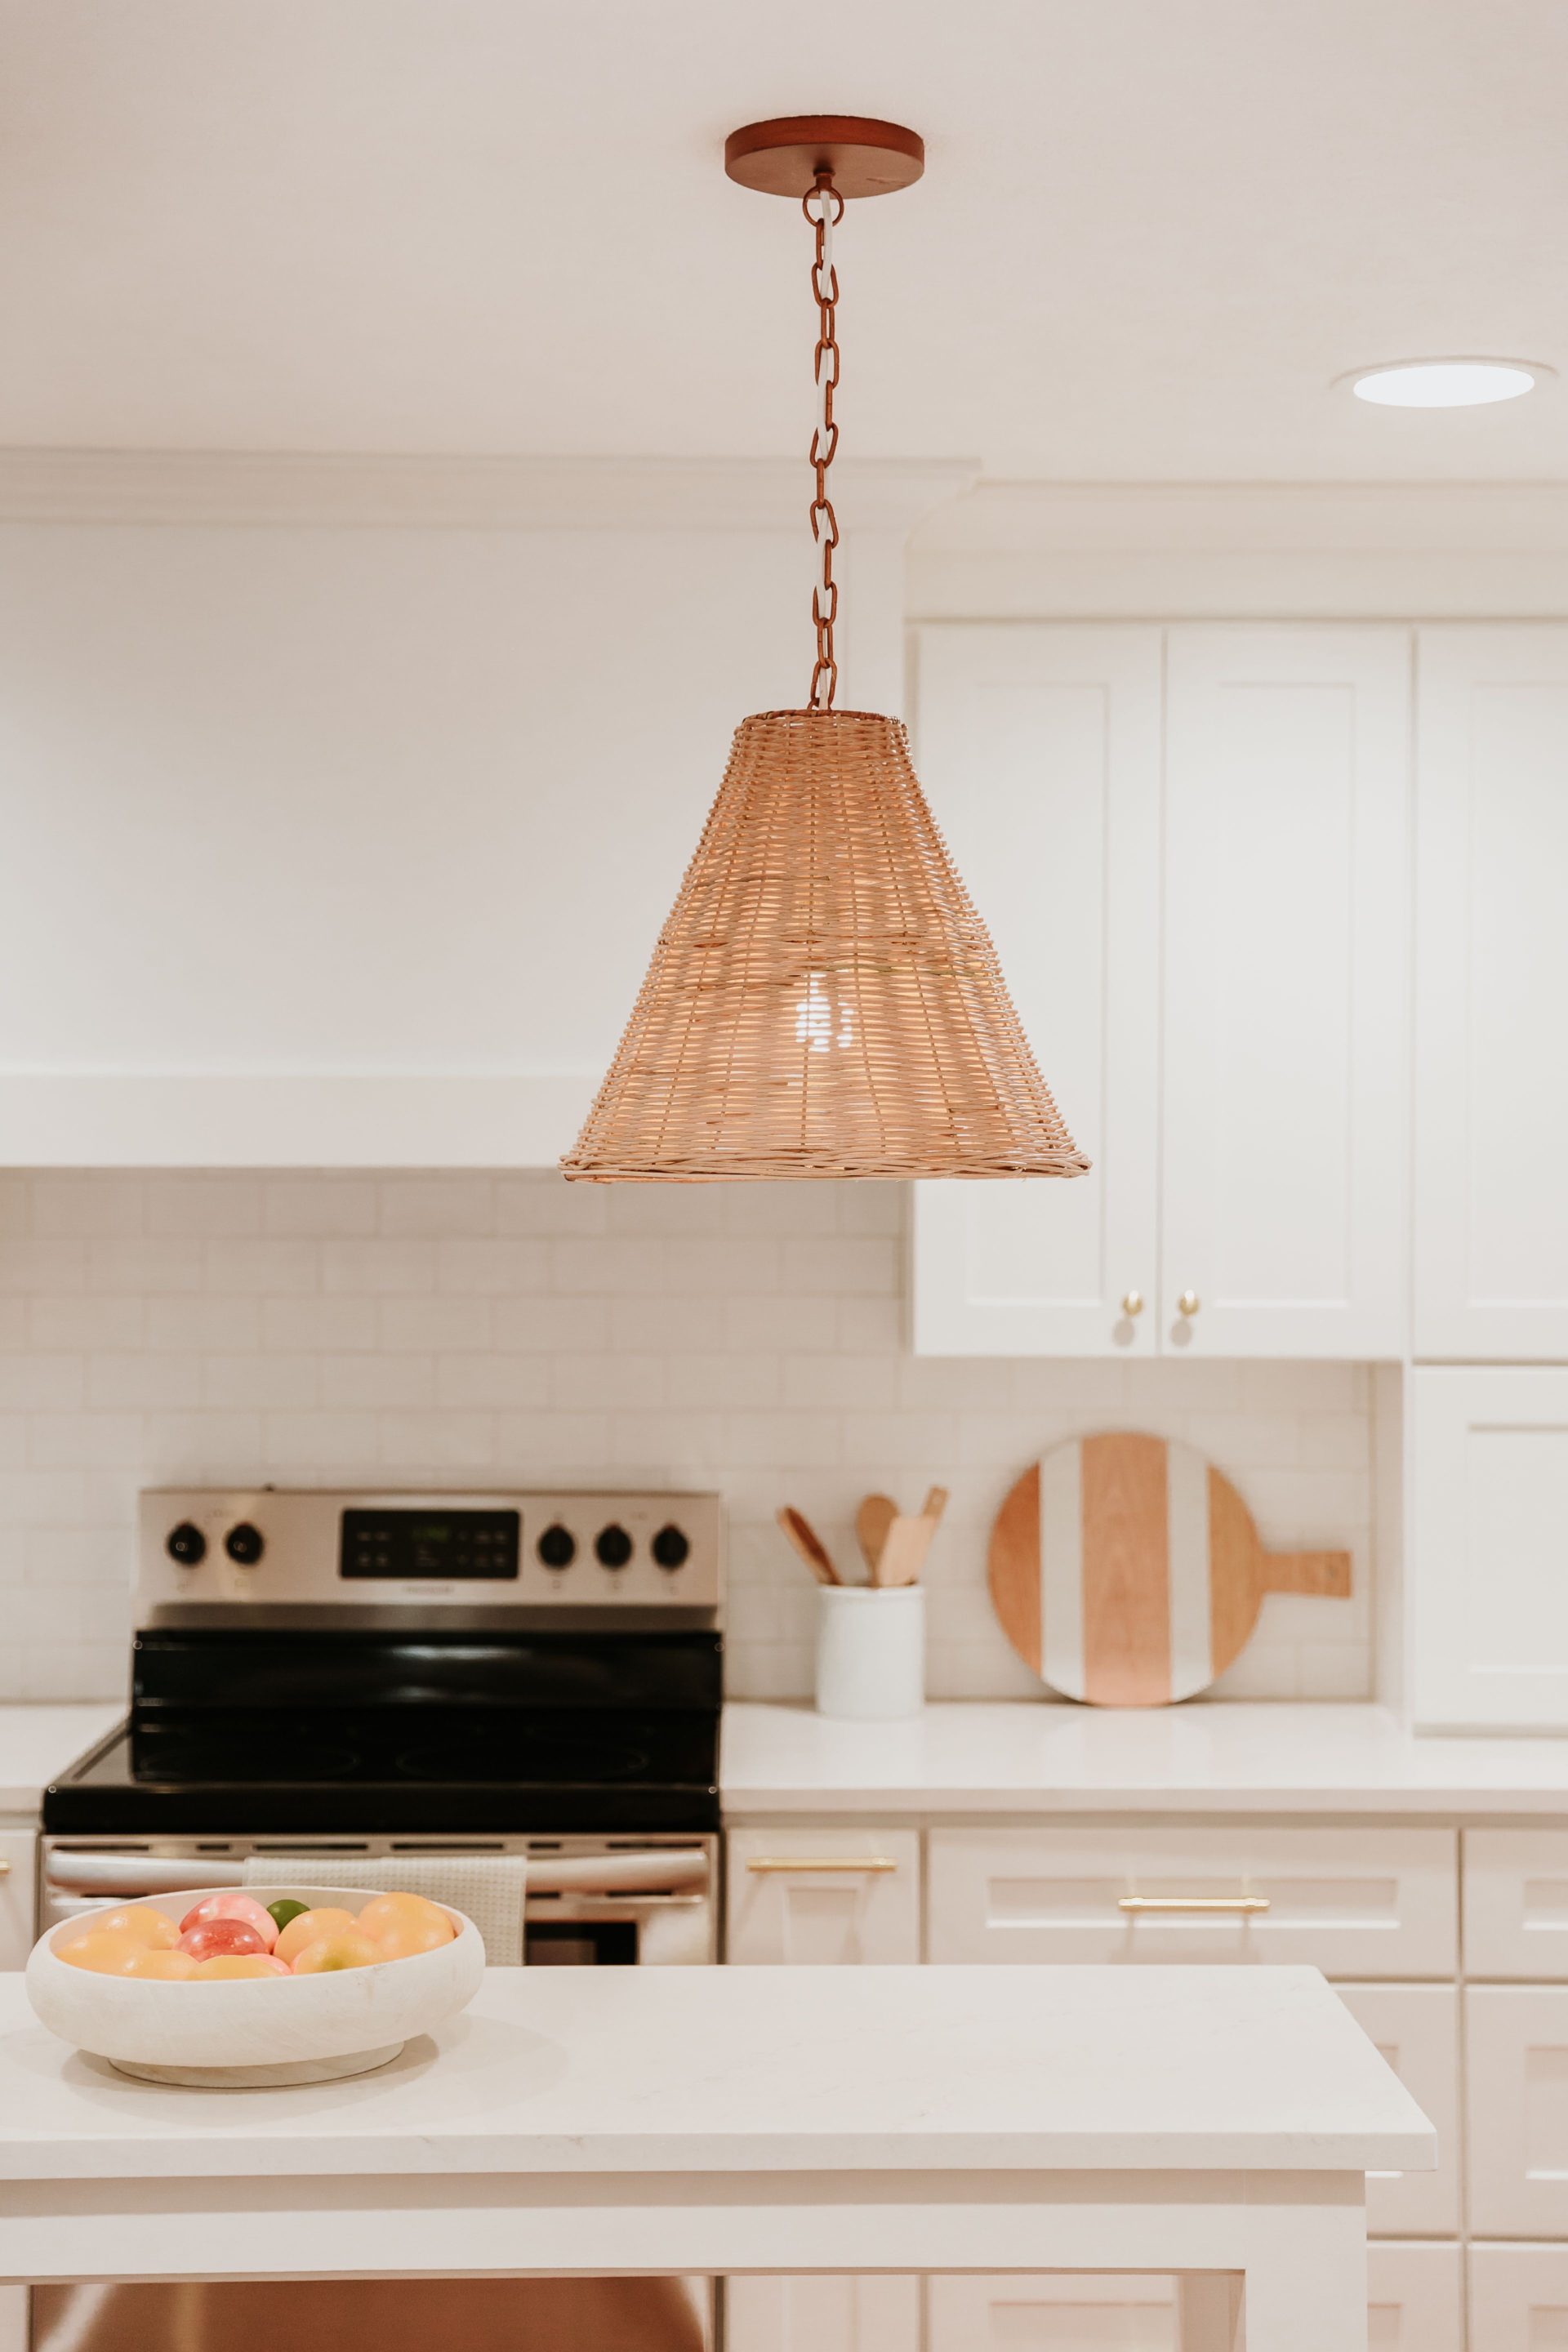 Kitchen Renovation Reveal | Musings by Madison - Interior Design Blog